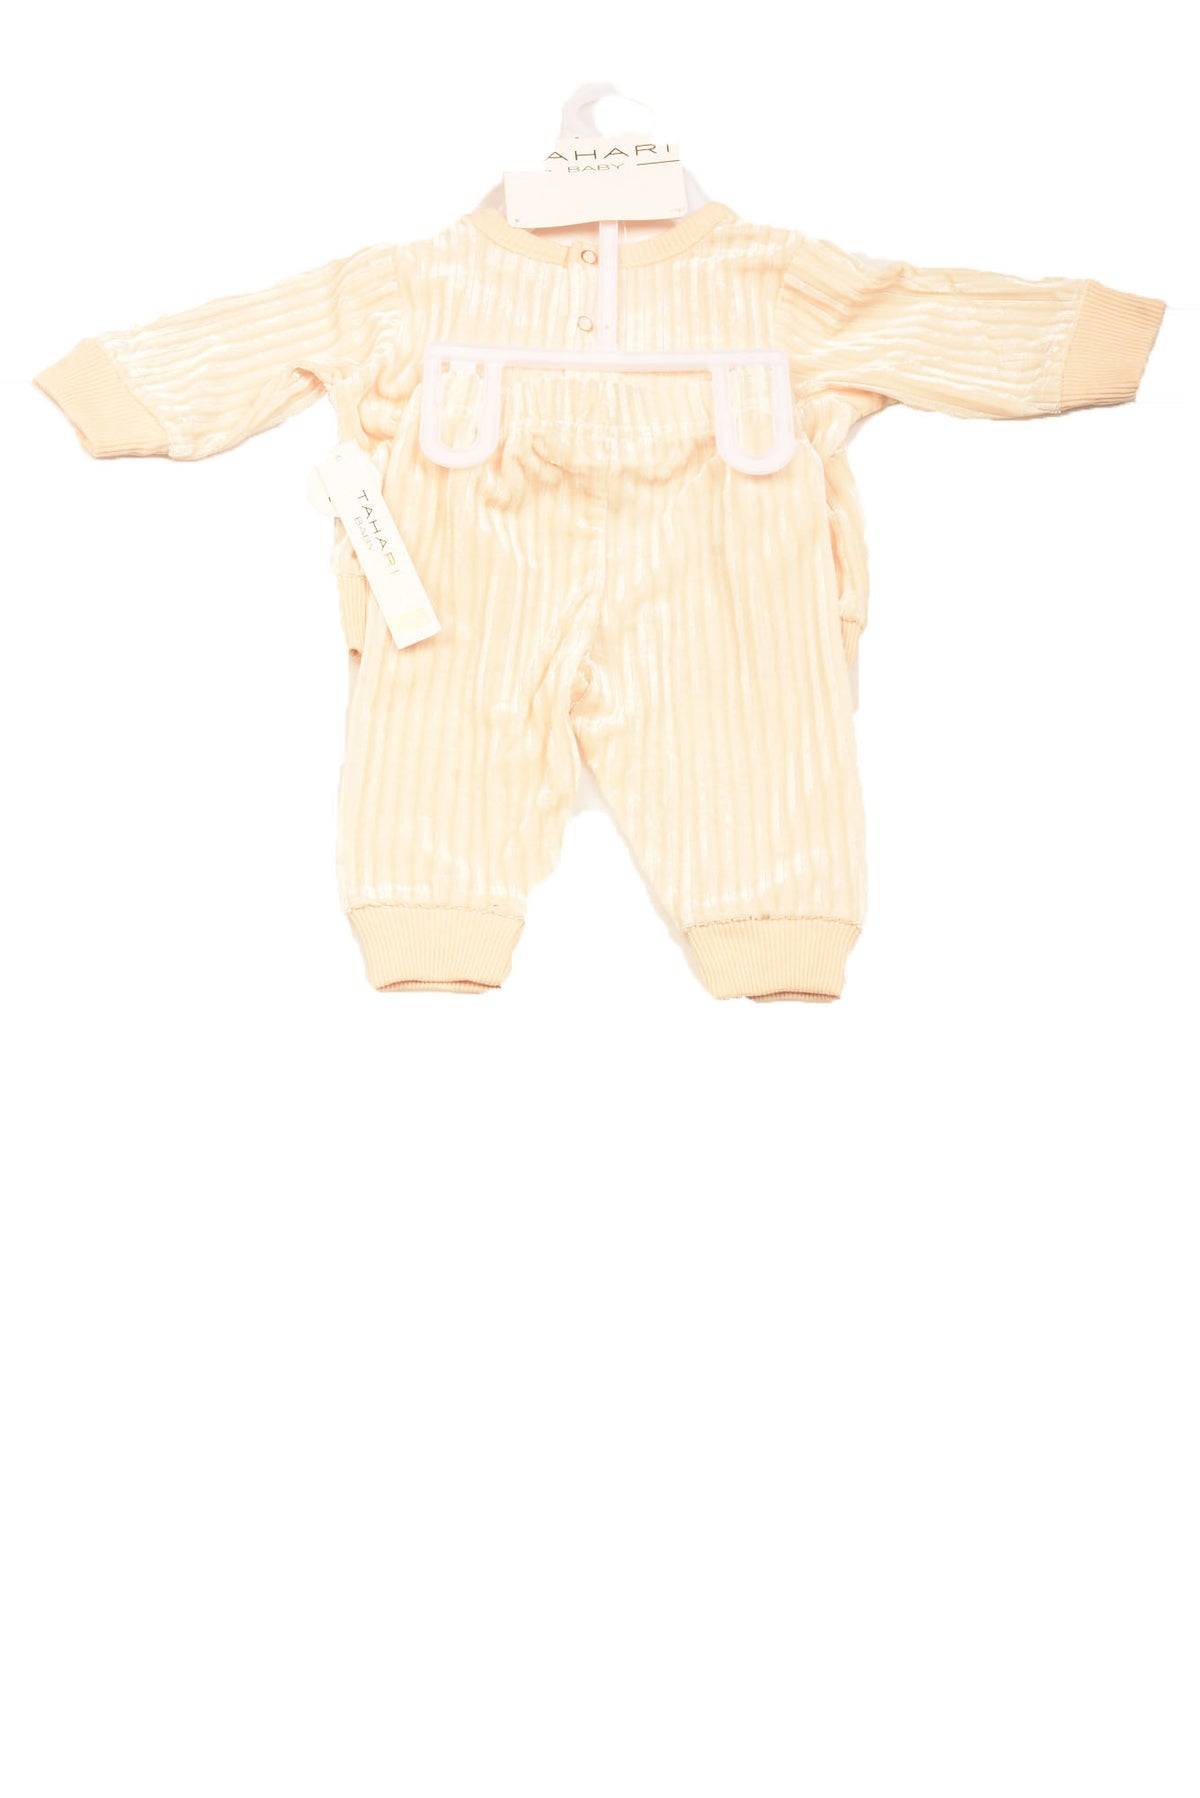 Tahari Baby Size 0-3 Months Infant Girl&#39;s Outfit